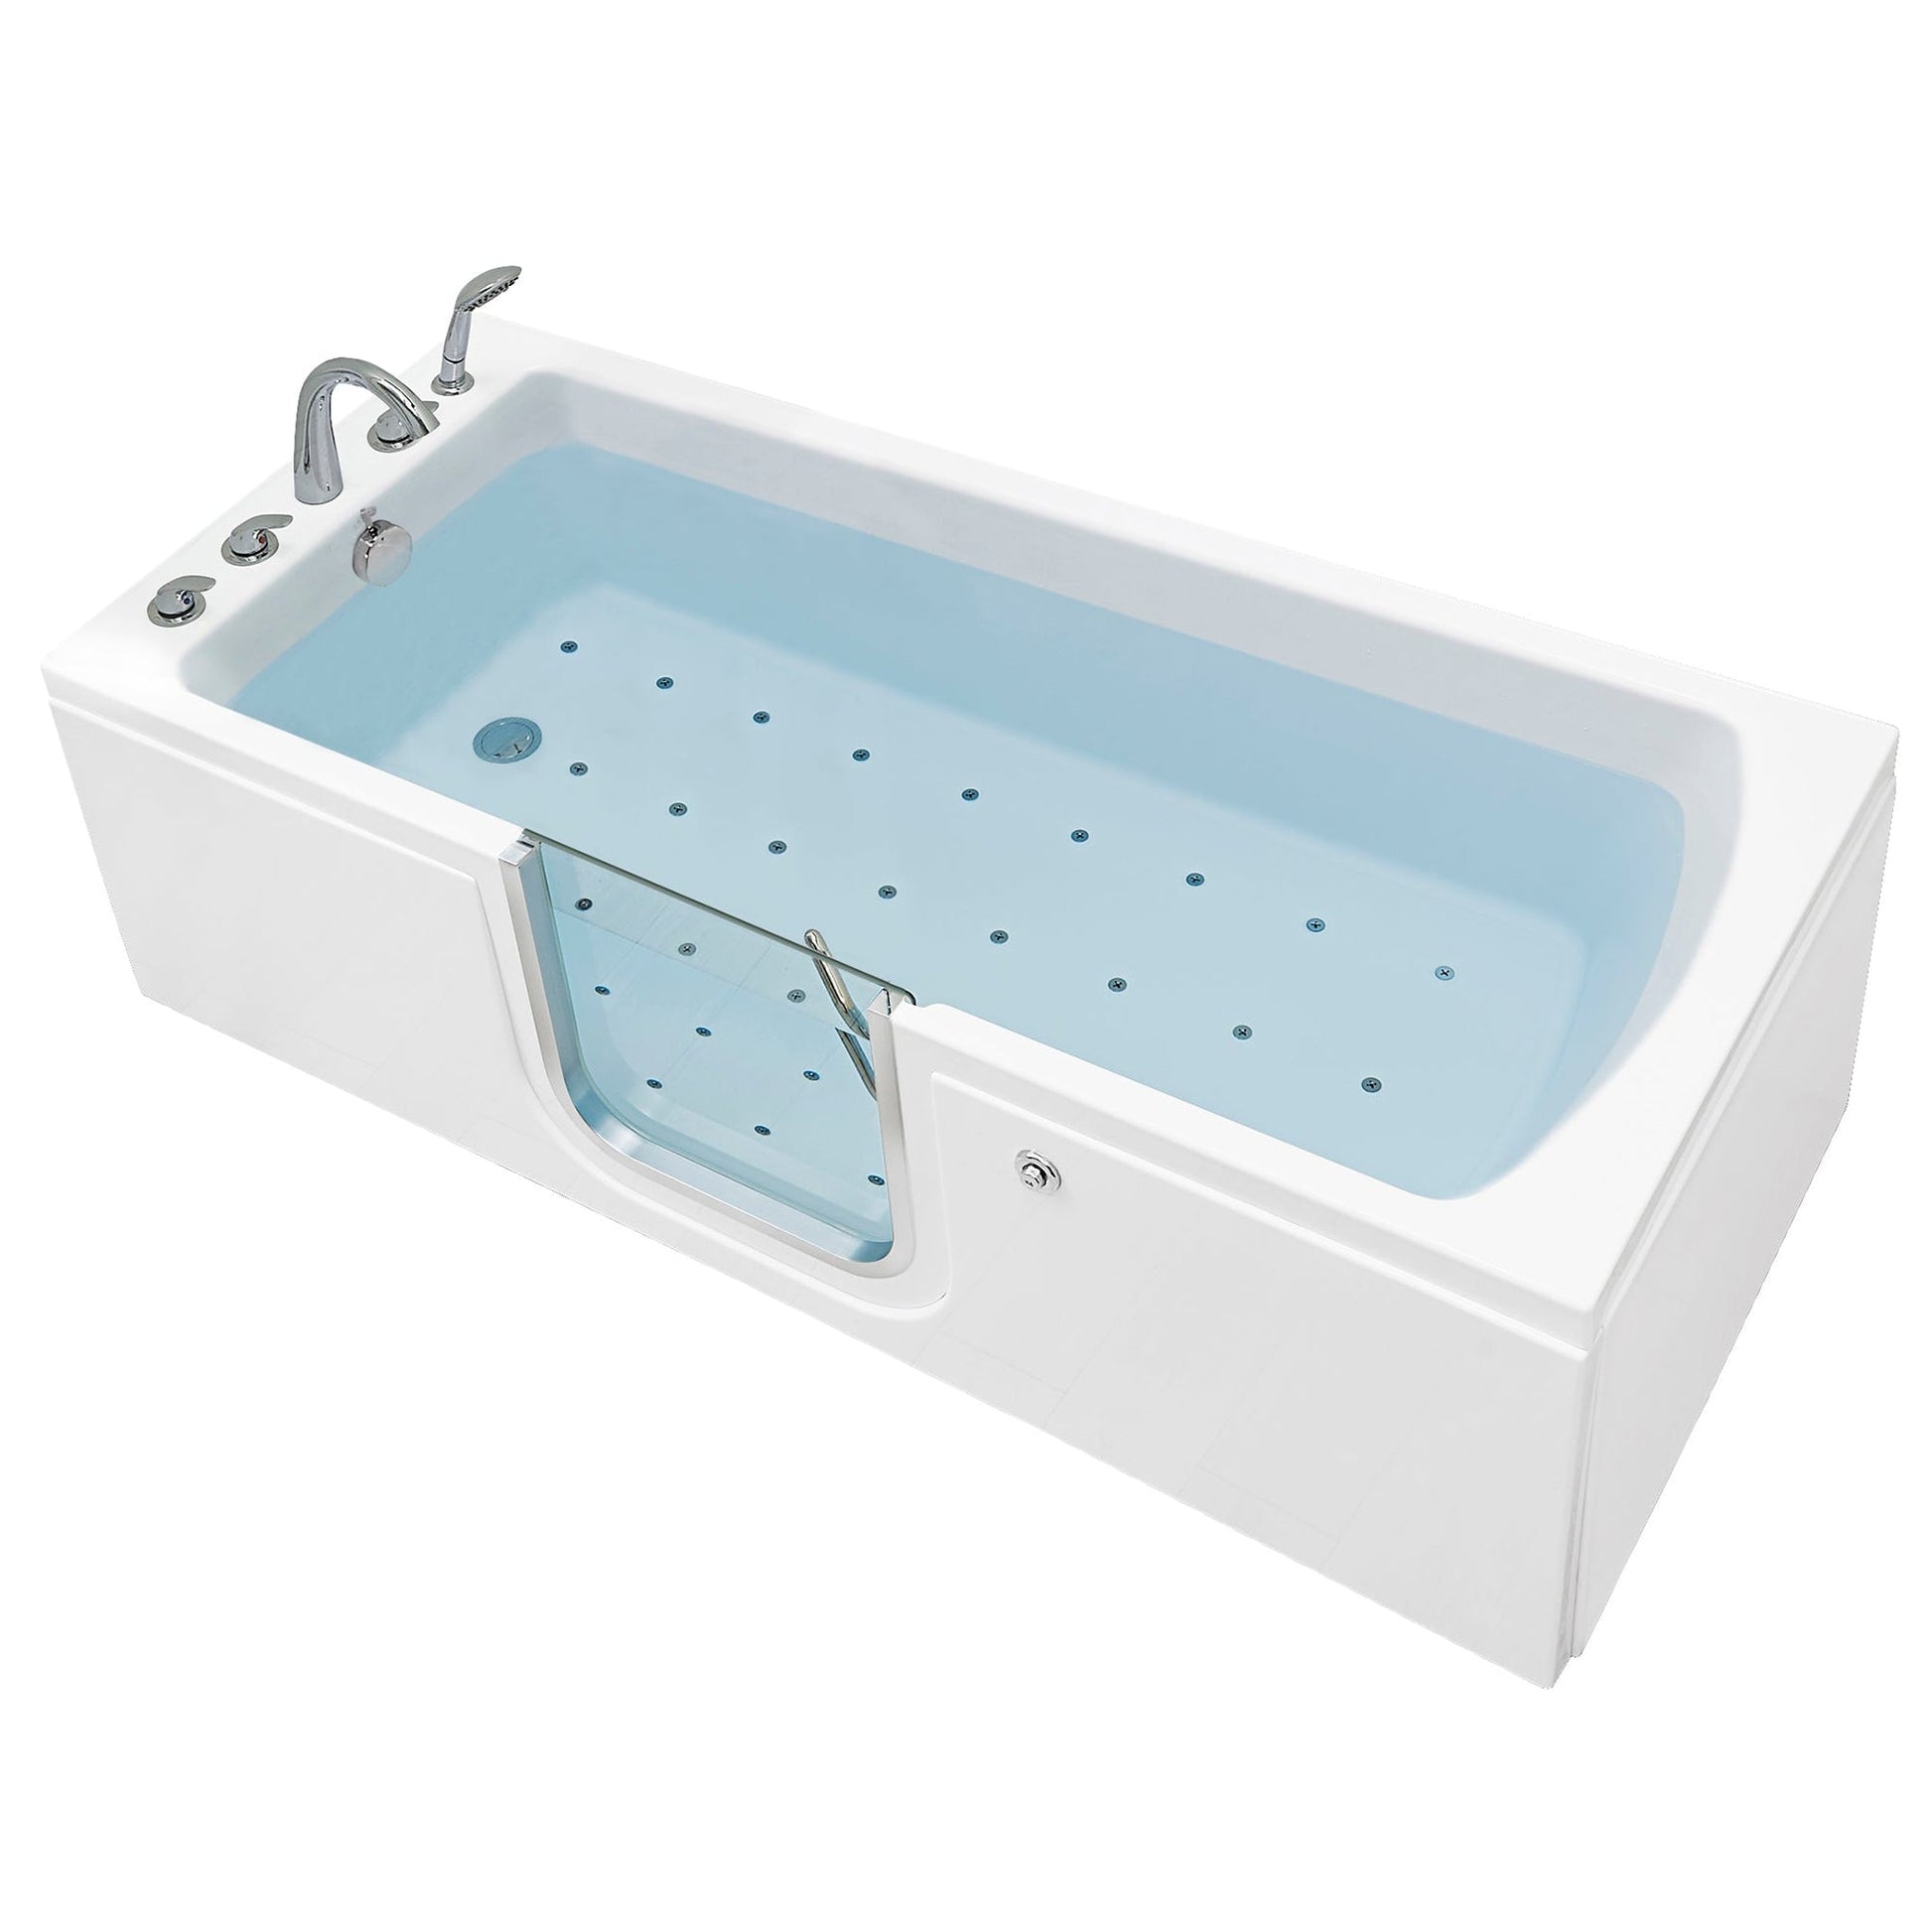 Ella's Bubbles Laydown 32" x 72" White Acrylic Air Massage Walk-In Bathtub With 5-Piece Fast Fill Faucet and Left Inward Swing Door